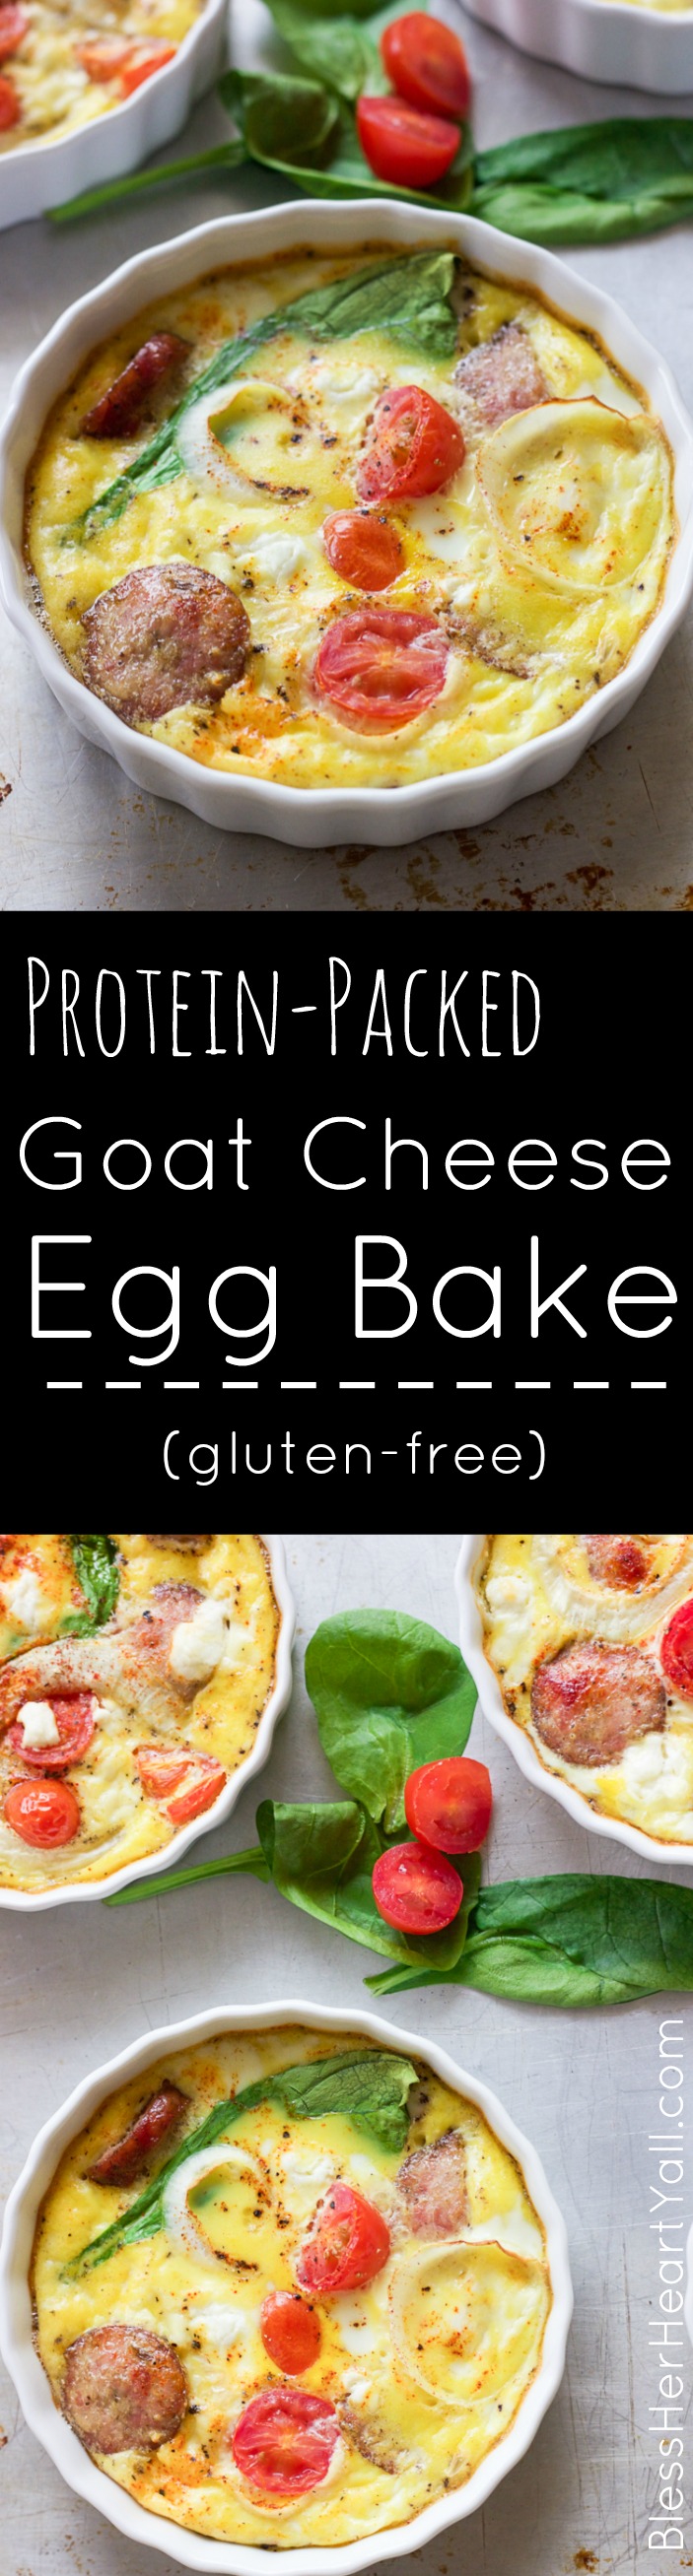 This gluten-free protein packed goat cheese egg bake combines the protein punch of fresh eggs, spinach, and breakfast sausage, with the flavors of creamy goat cheese, tomatoes and a little sweet onion slices for one amazing baked breakfast to fuel your morning right!